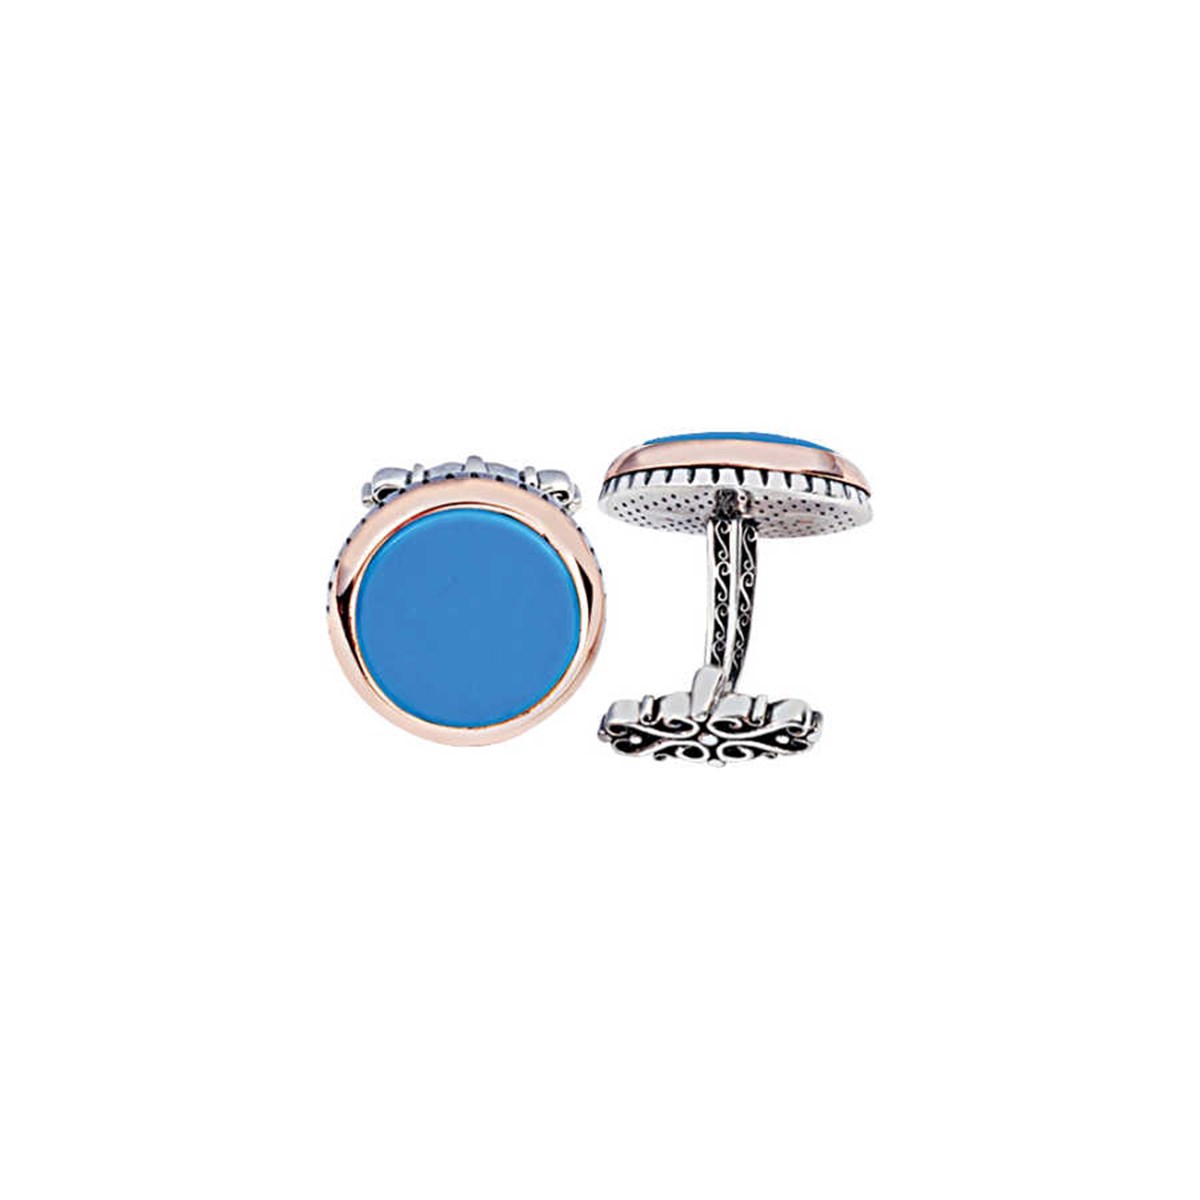 Silver Turquoise Stone Round Model Cufflinks